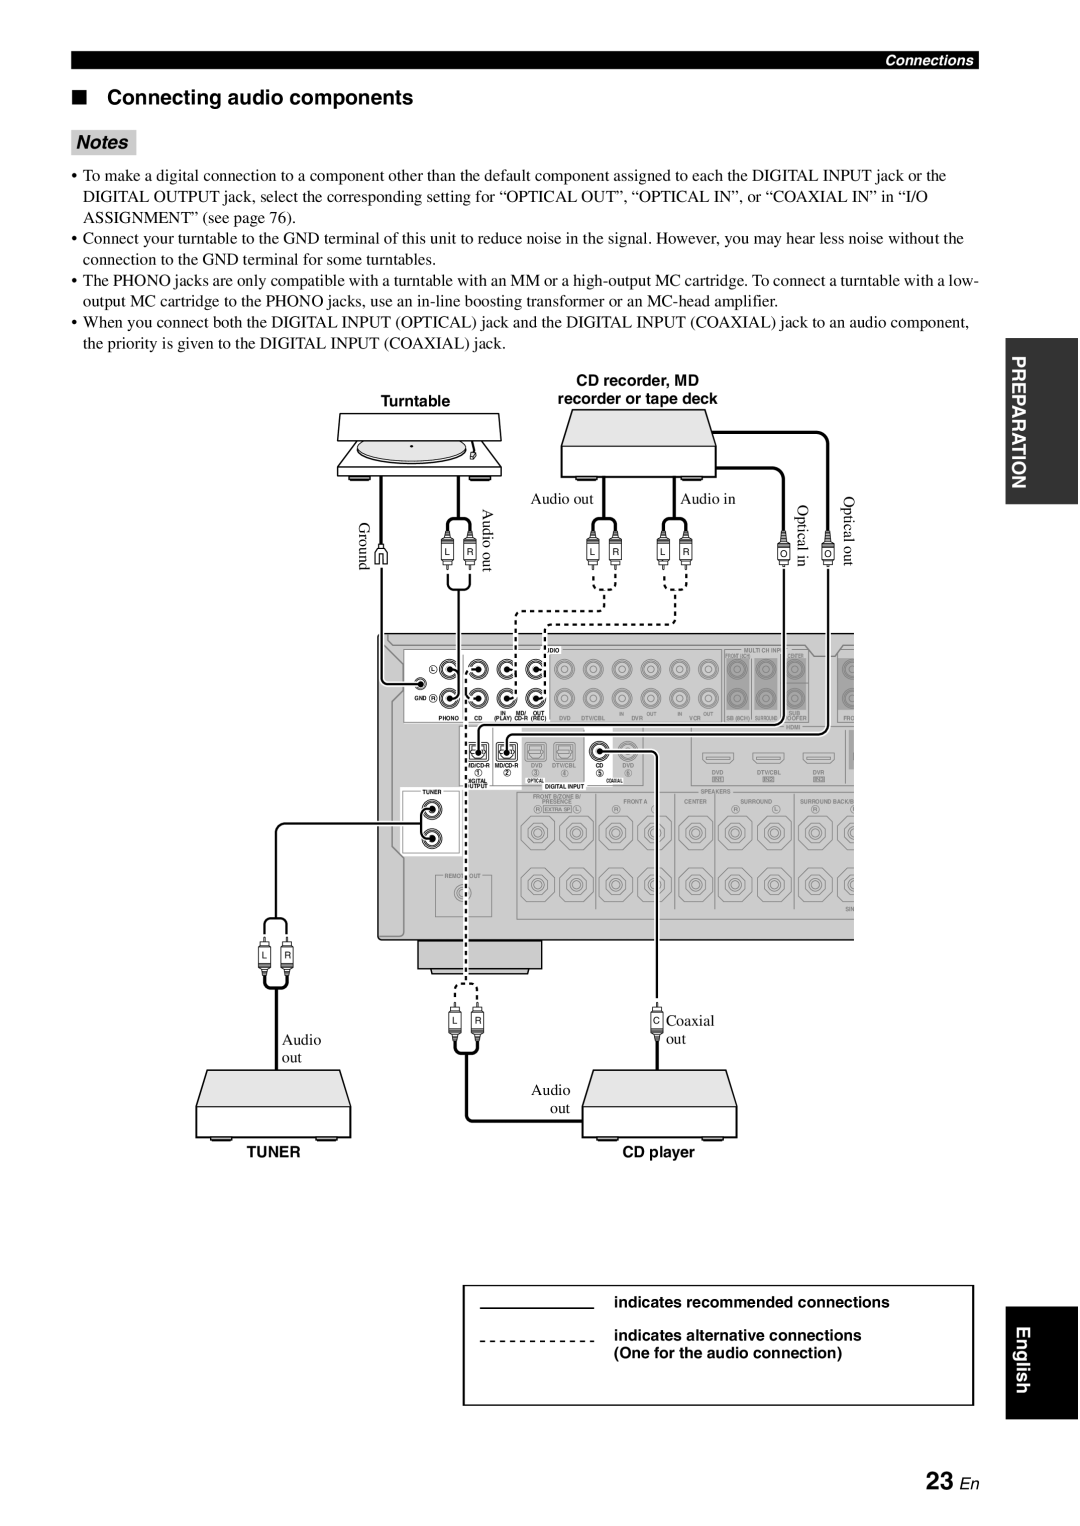 Yamaha DSP-AX863SE owner manual 23 En, Connecting audio components, Notes 